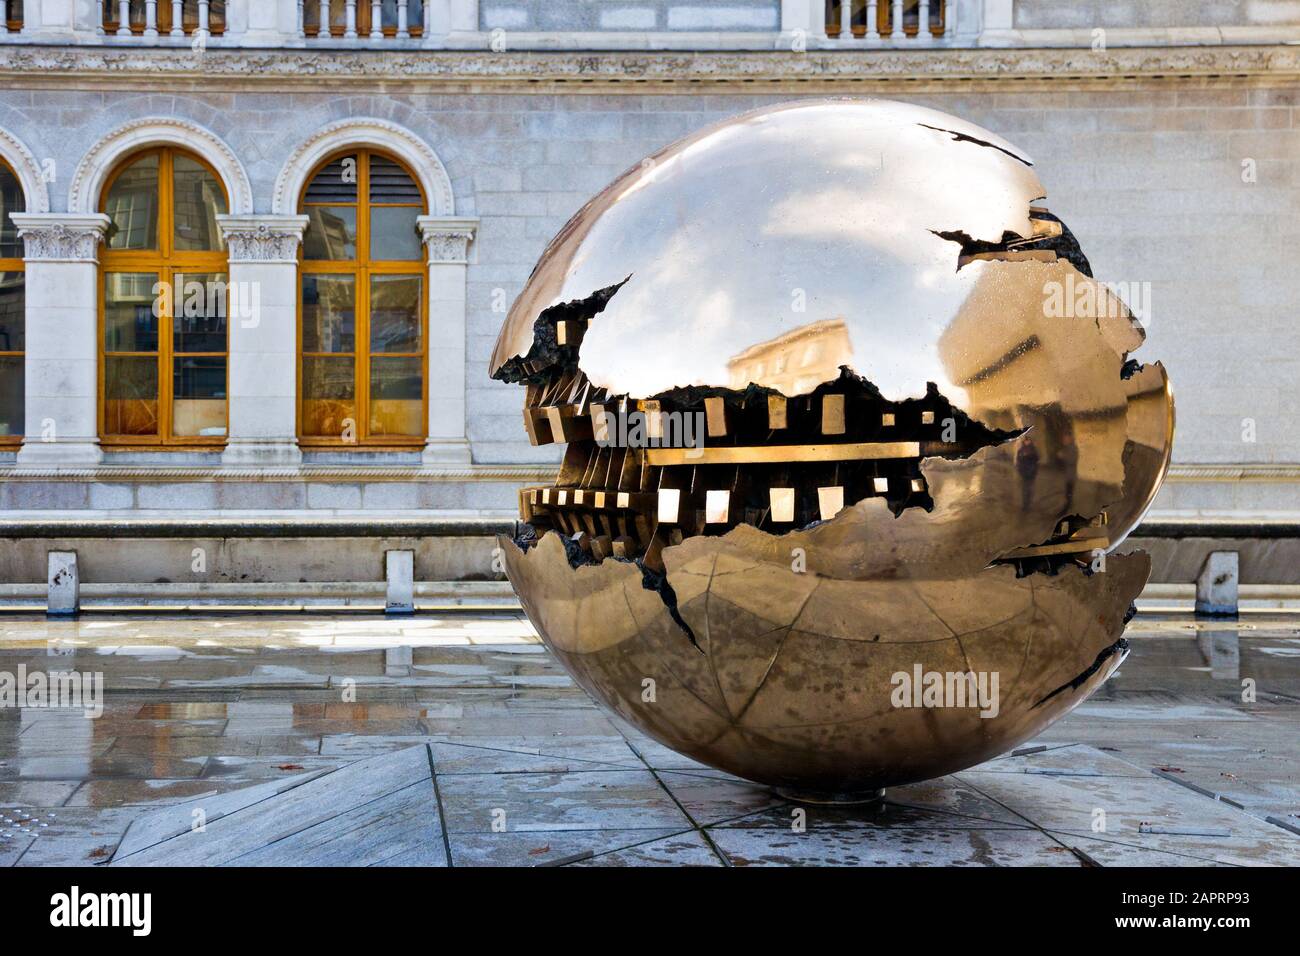 DUBLIN, IRELAND - FEB 15, 2014: Abstract spherical metal sculpture on a courtyard of Trinity College. Stock Photo